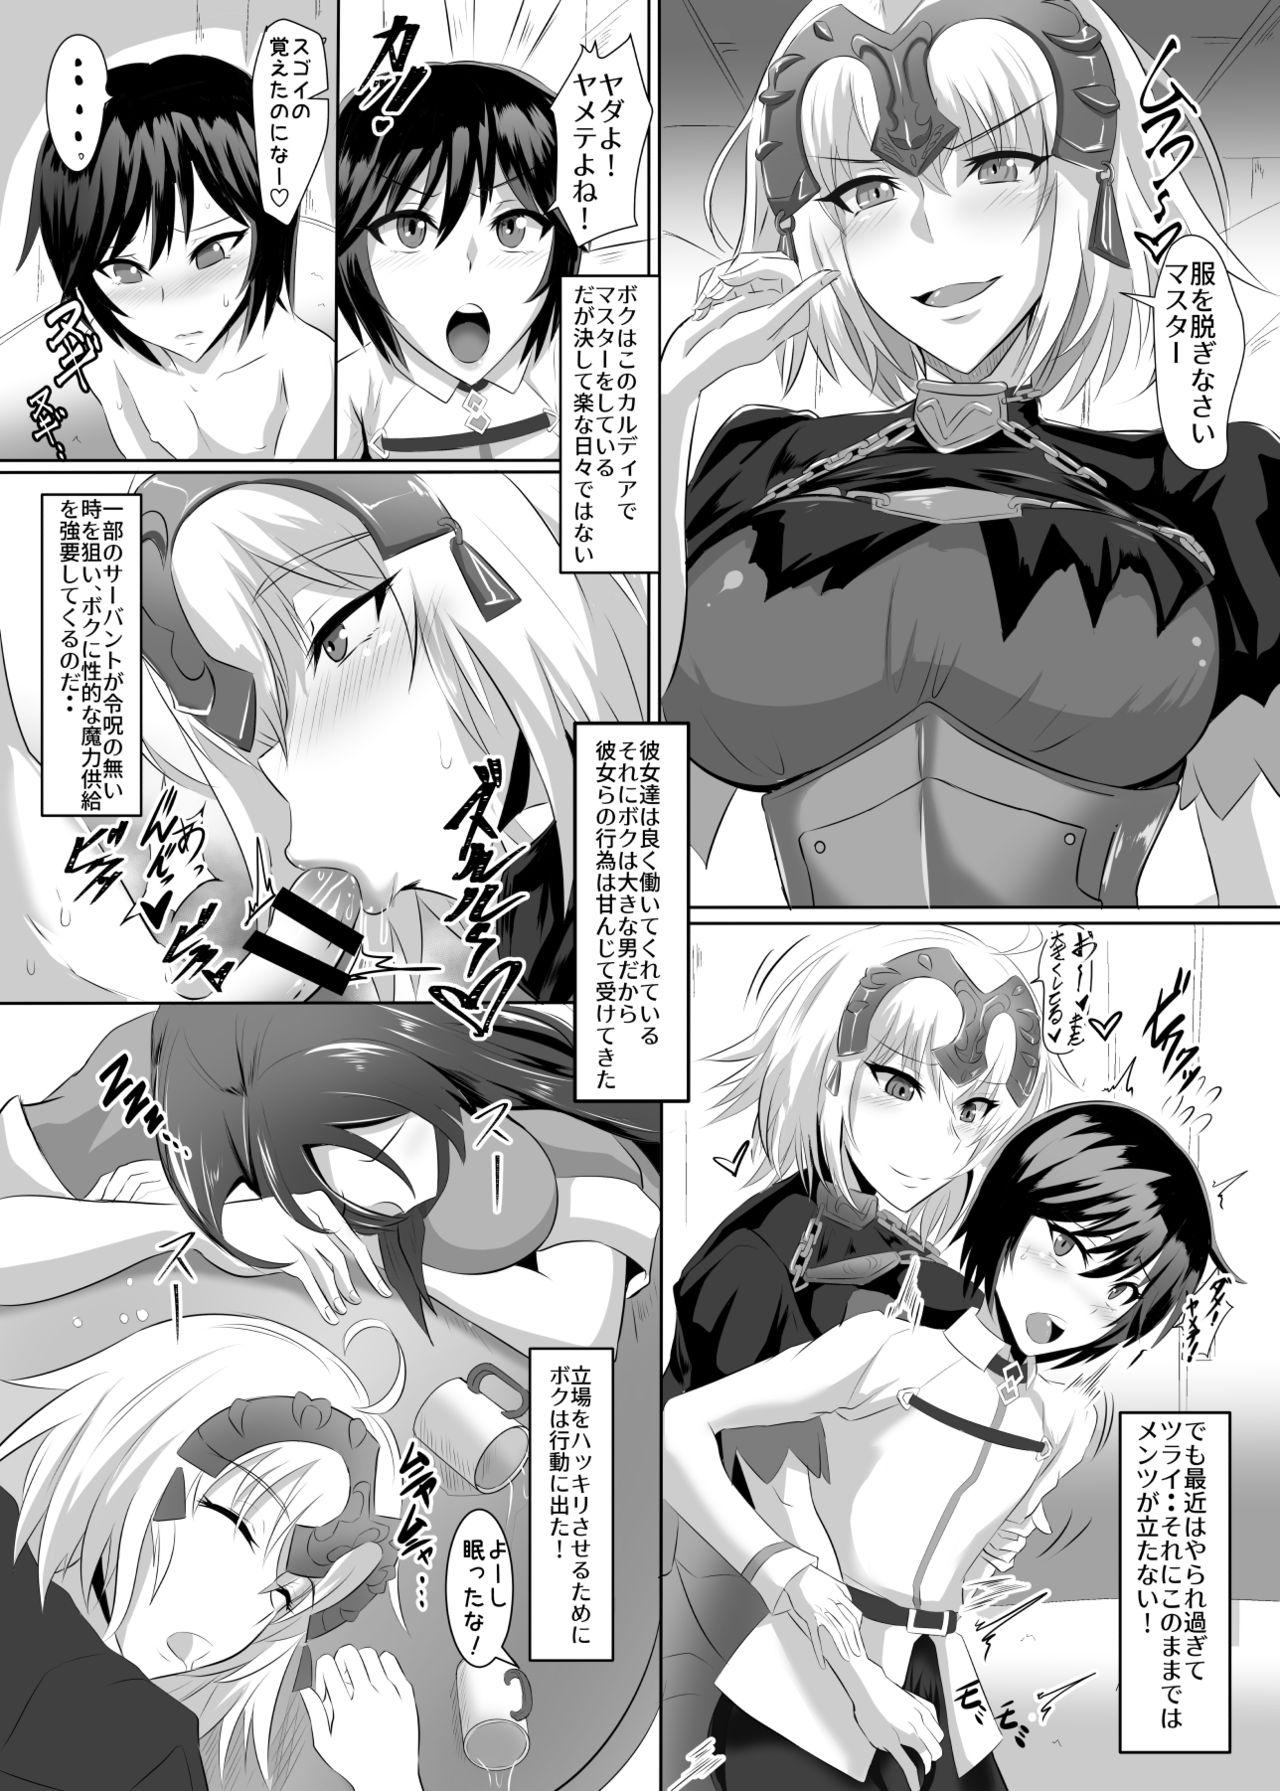 Gayhardcore Gehenna 7 - Fate grand order Gay Pissing - Page 4